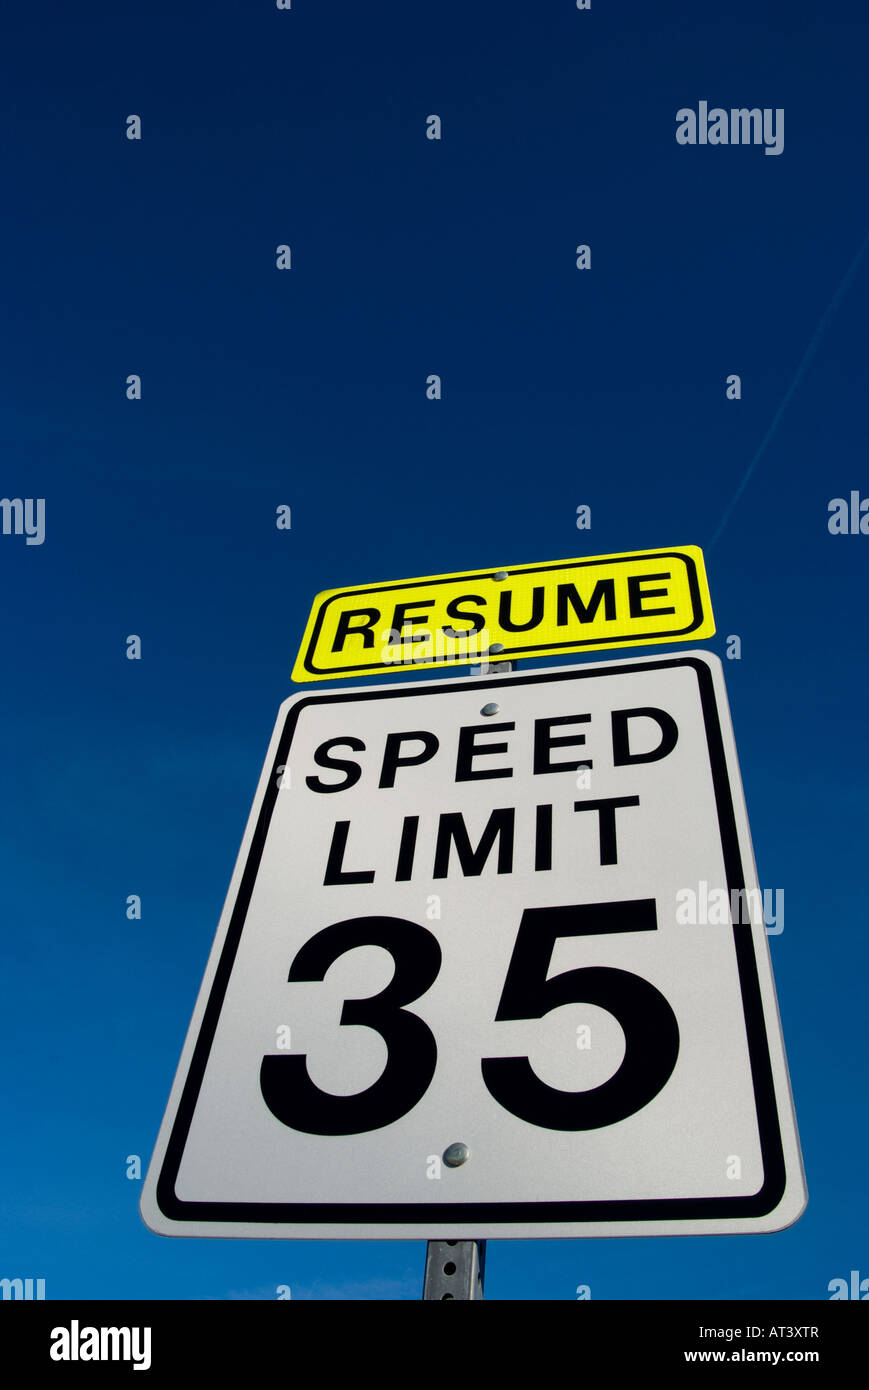 Resume 35 mph speed limit sign Stock Photo